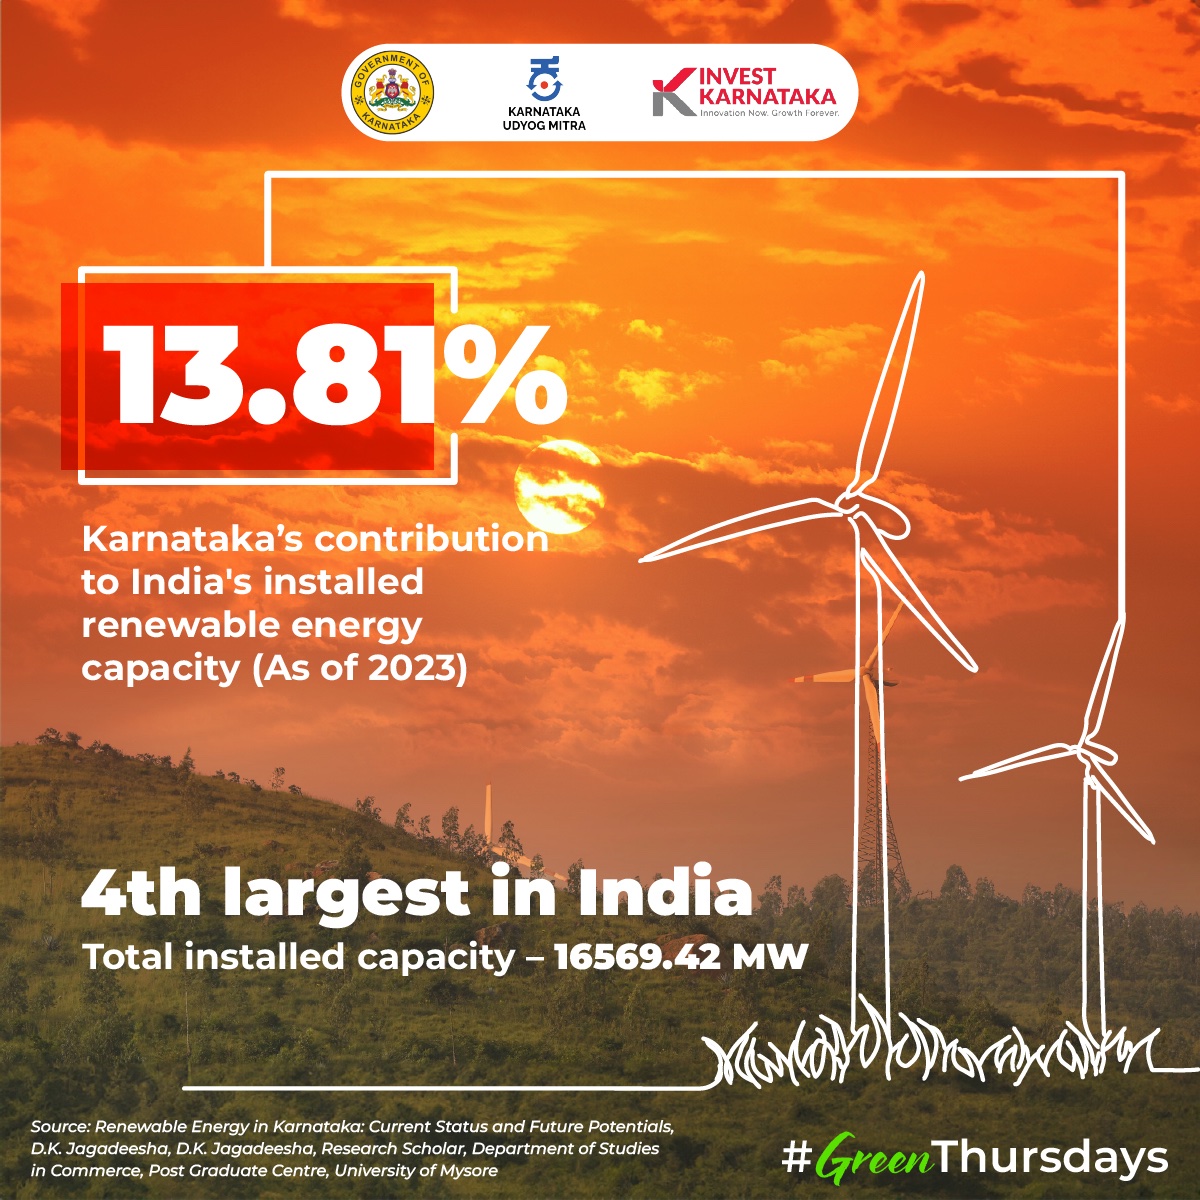 Karnataka is committed to responsible economic development. We are leading India's #greenenergy transition with a large share in installed renewable energy capacity. #Investment in Karnataka is an investment in #innovation and #sustainablefuture. 
#InvestKarnataka #GreenThursdays